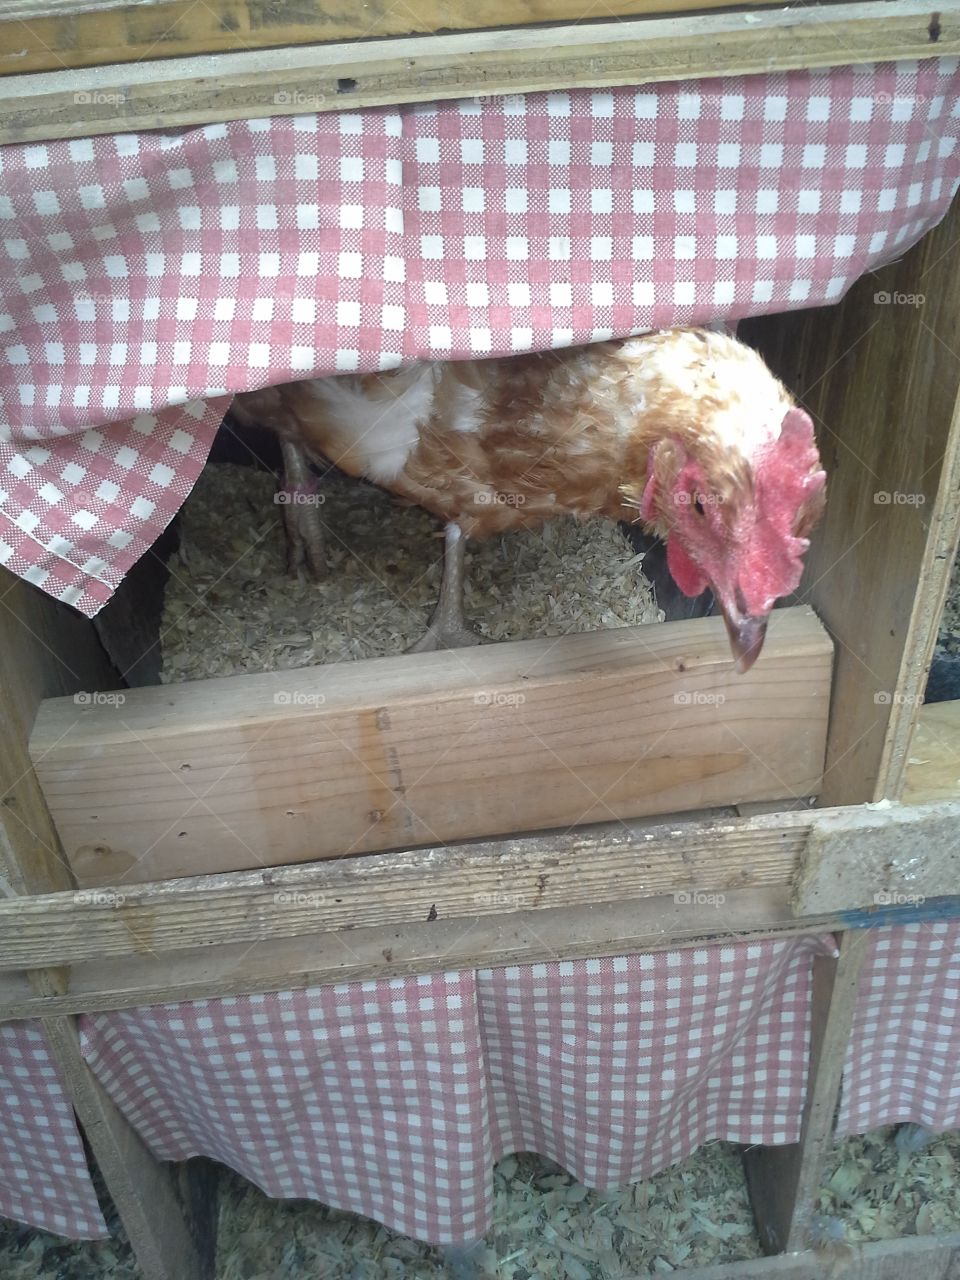 Curious hen. This Chicken decided to check out her new nesting box after us girls decorated it